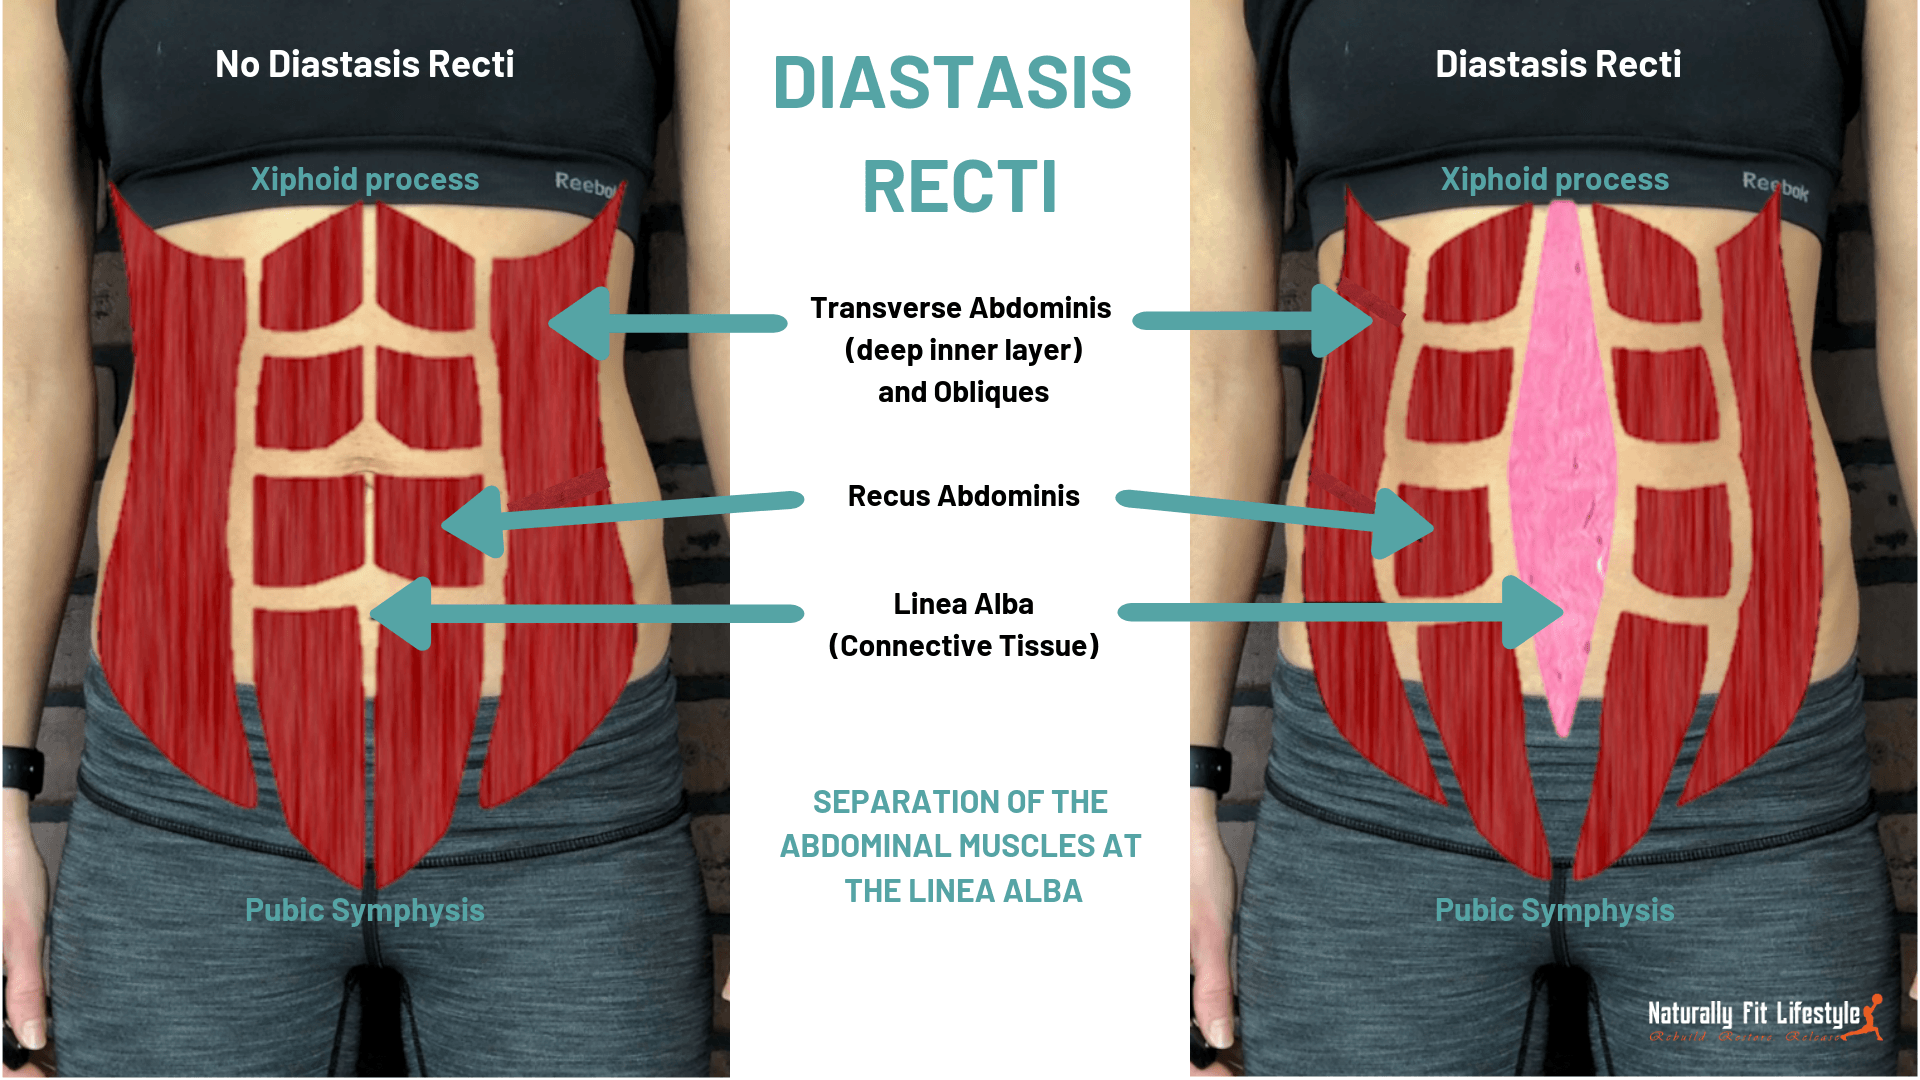 https://www.naturallyfitlifestyle.com/wp-content/uploads/2019/03/Diastasis-recti-overlay-showing-muscle-sep-2.png